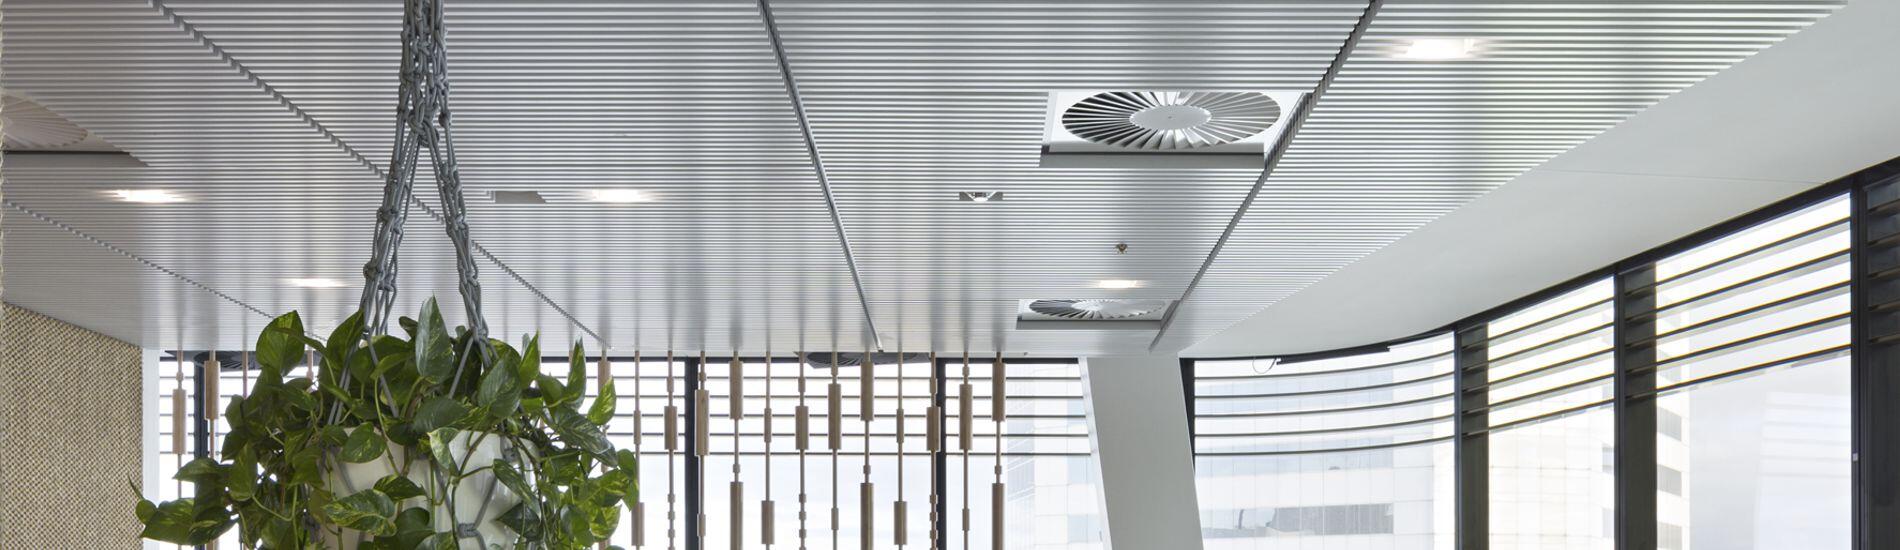 SUPATILE SLAT Slatted Ceiling Tiles Create Contemporary Look in Workplace Breakouts